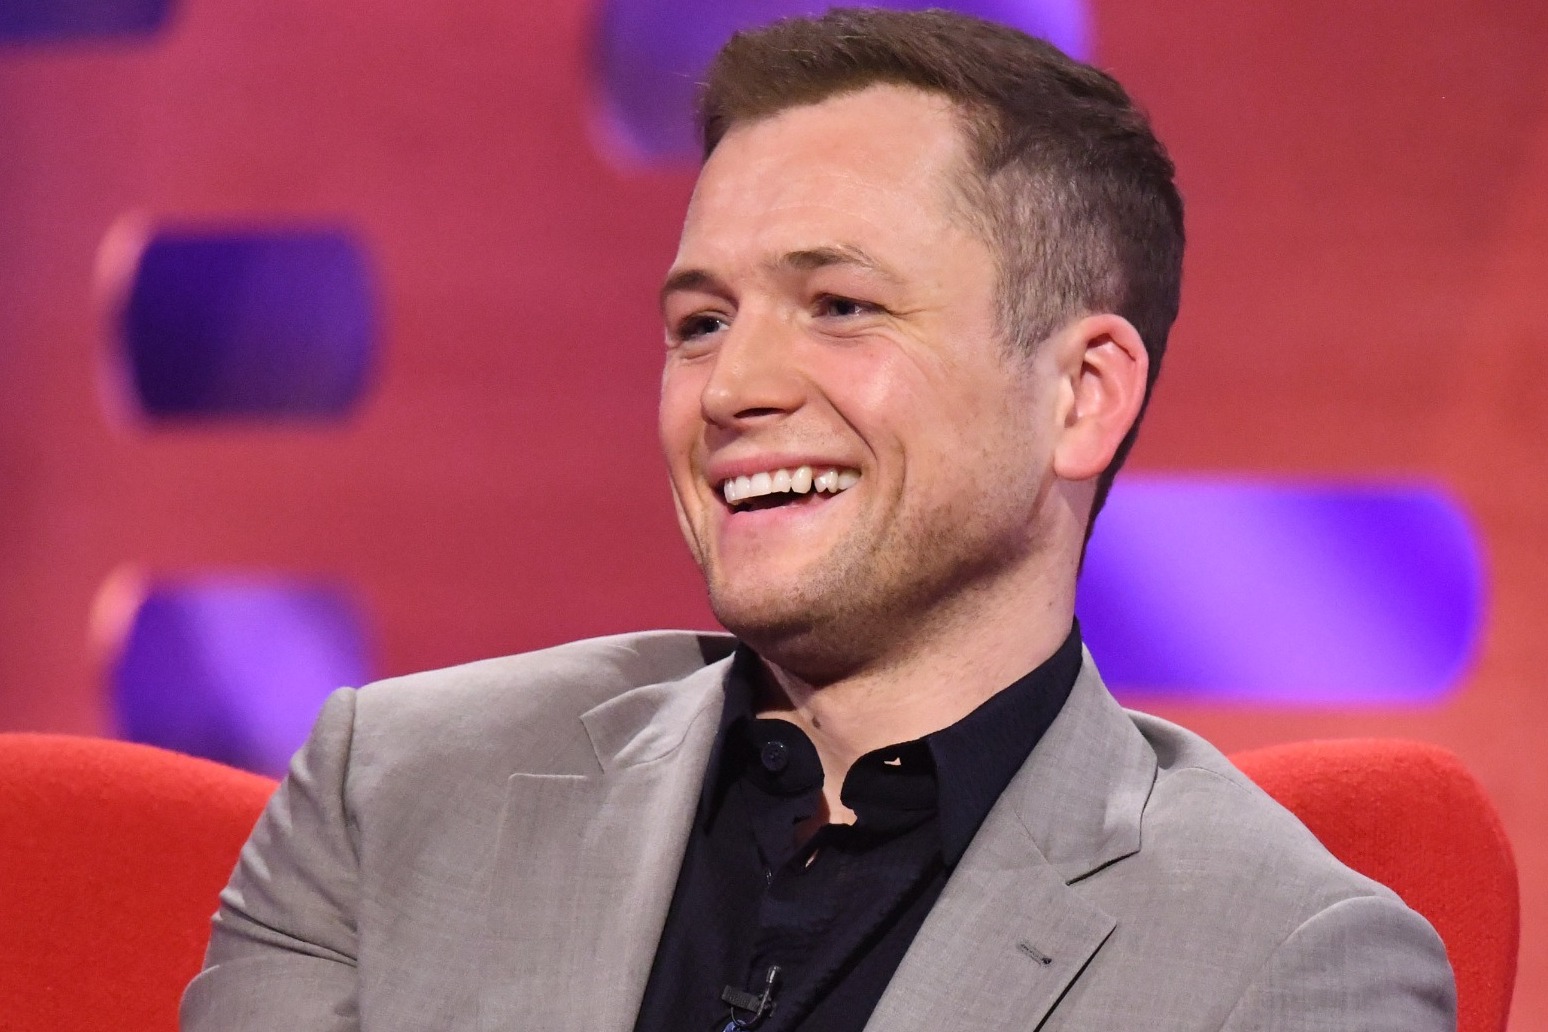 Taron Egerton says he is ‘completely fine’ after fainting during West End play 